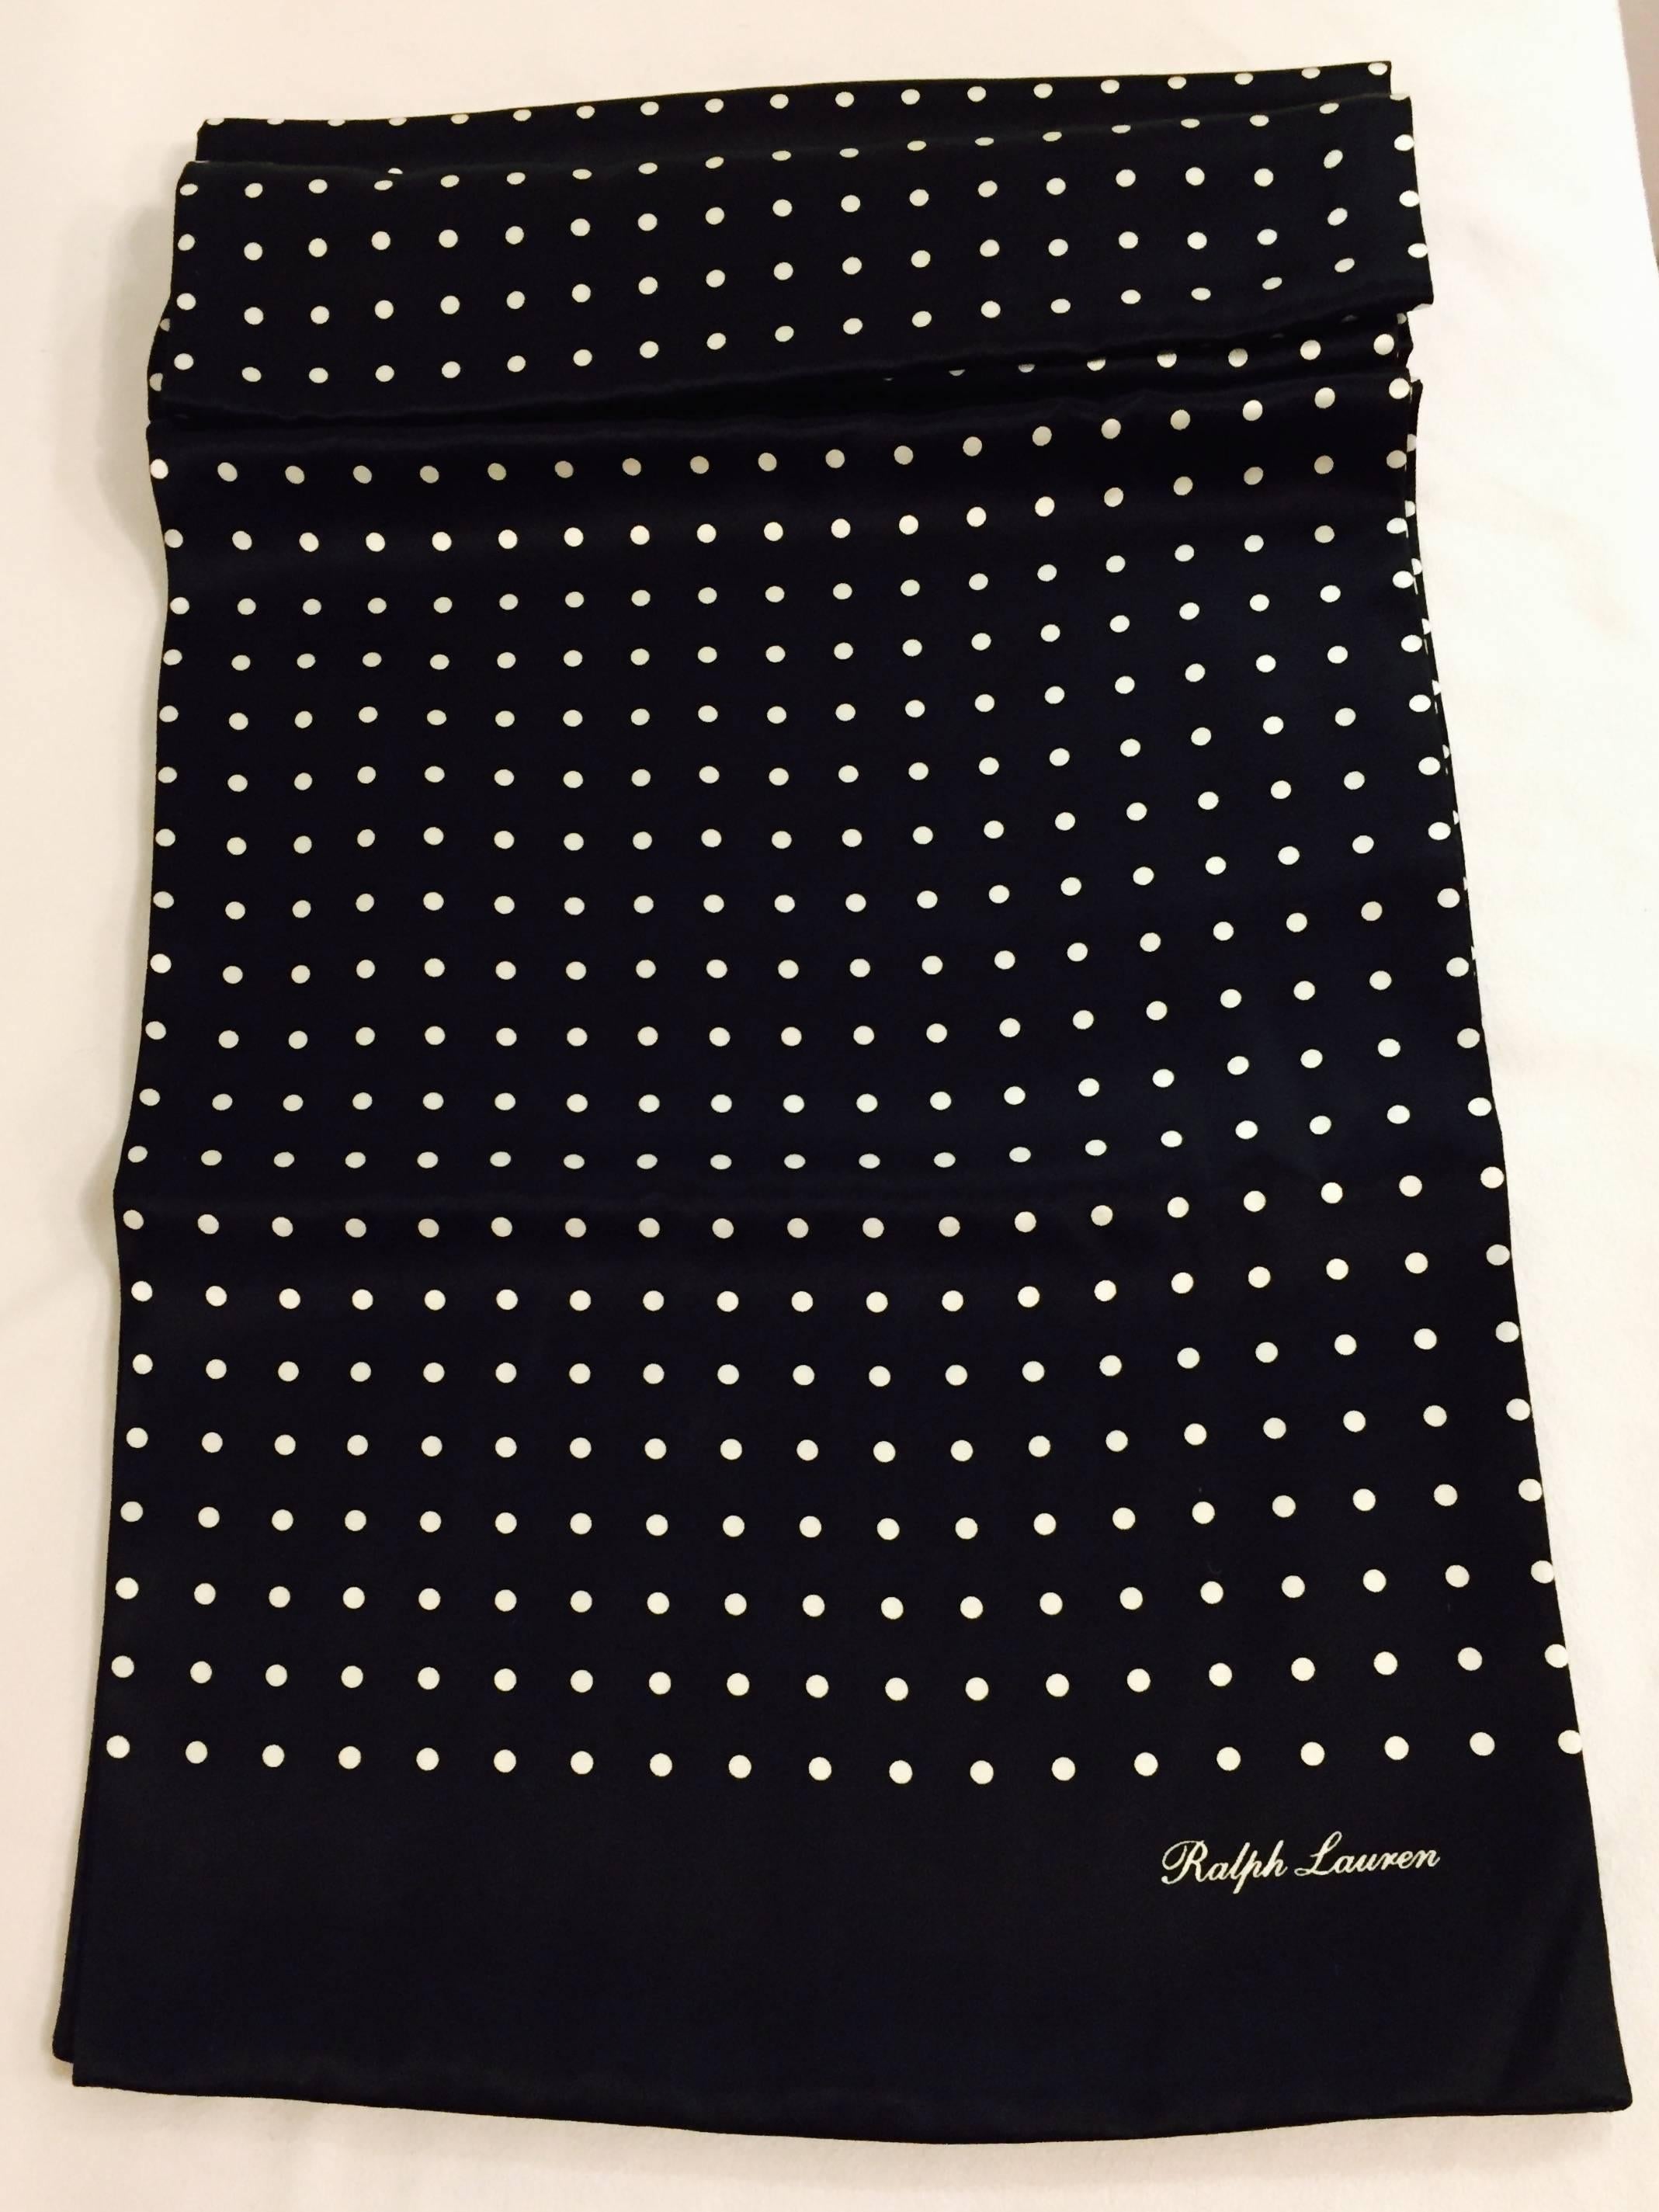 Cut a dashing figure in your tux, with this refined Ralph Lauren scarf in two sided silk, with ivory polka dots on a black background.  Made in Italy, it measures 12 inches wide and 62 inches long.